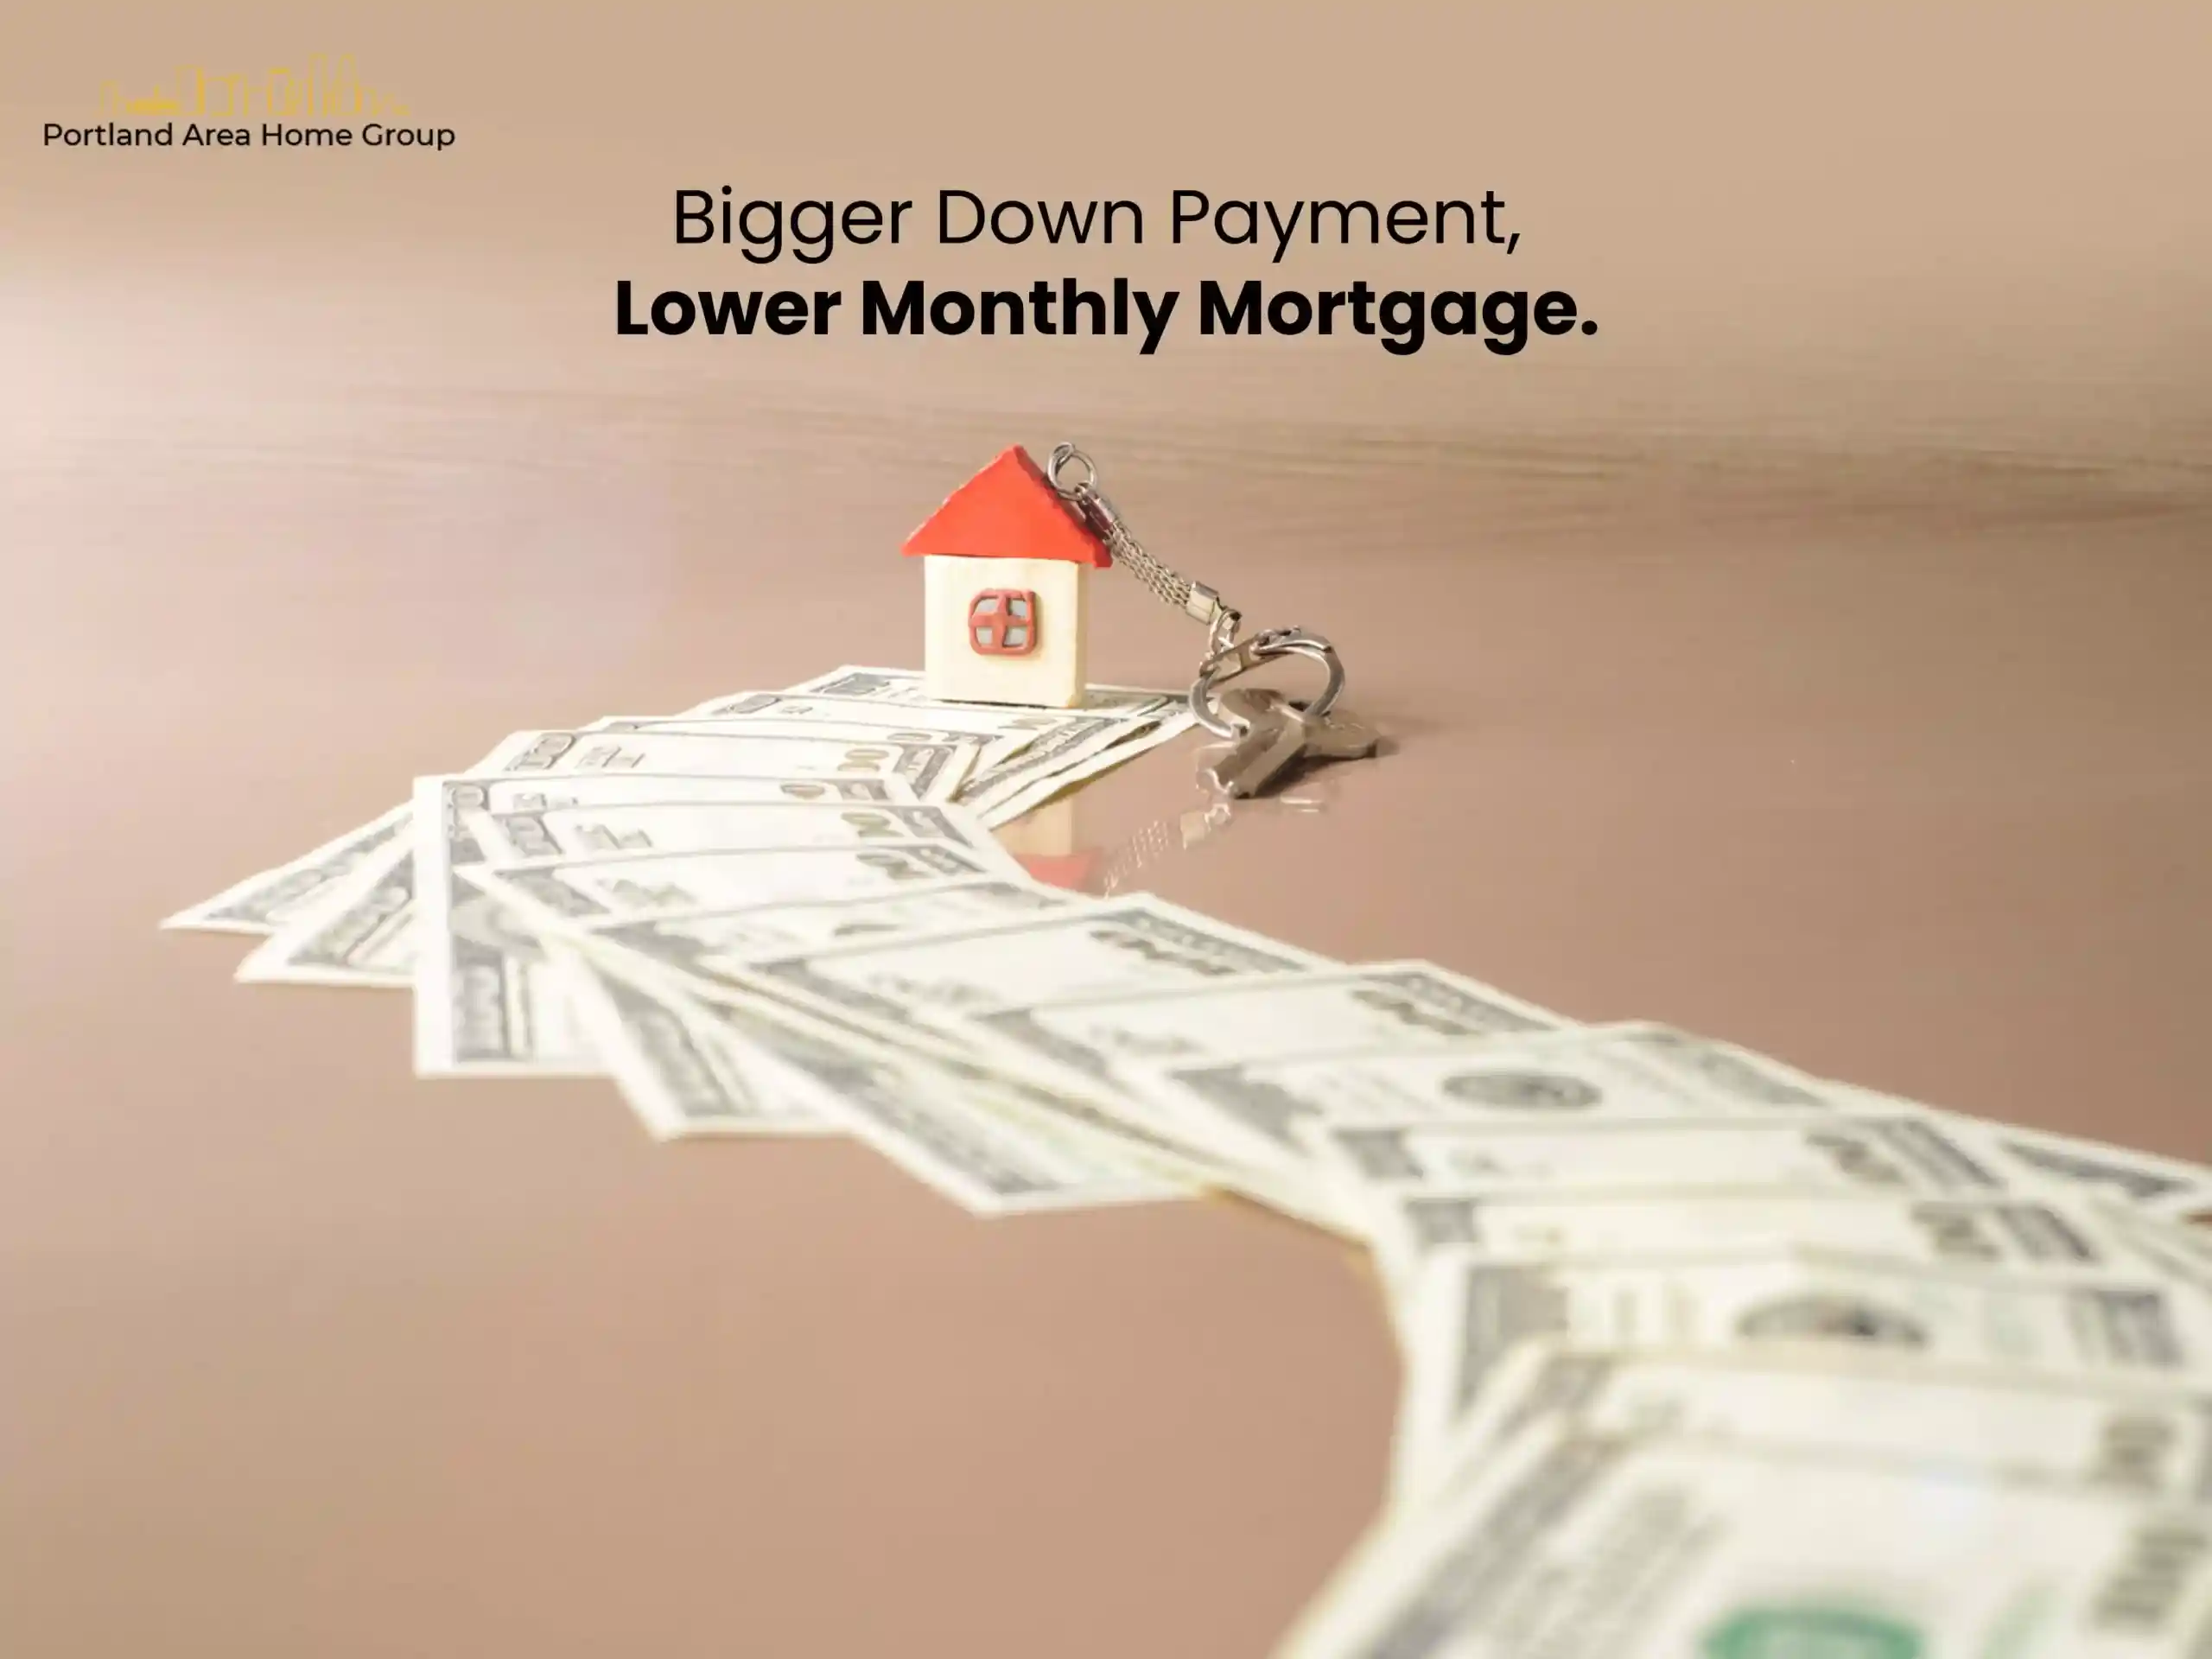 Bigger Down Payment, Lower Monthly Mortgage